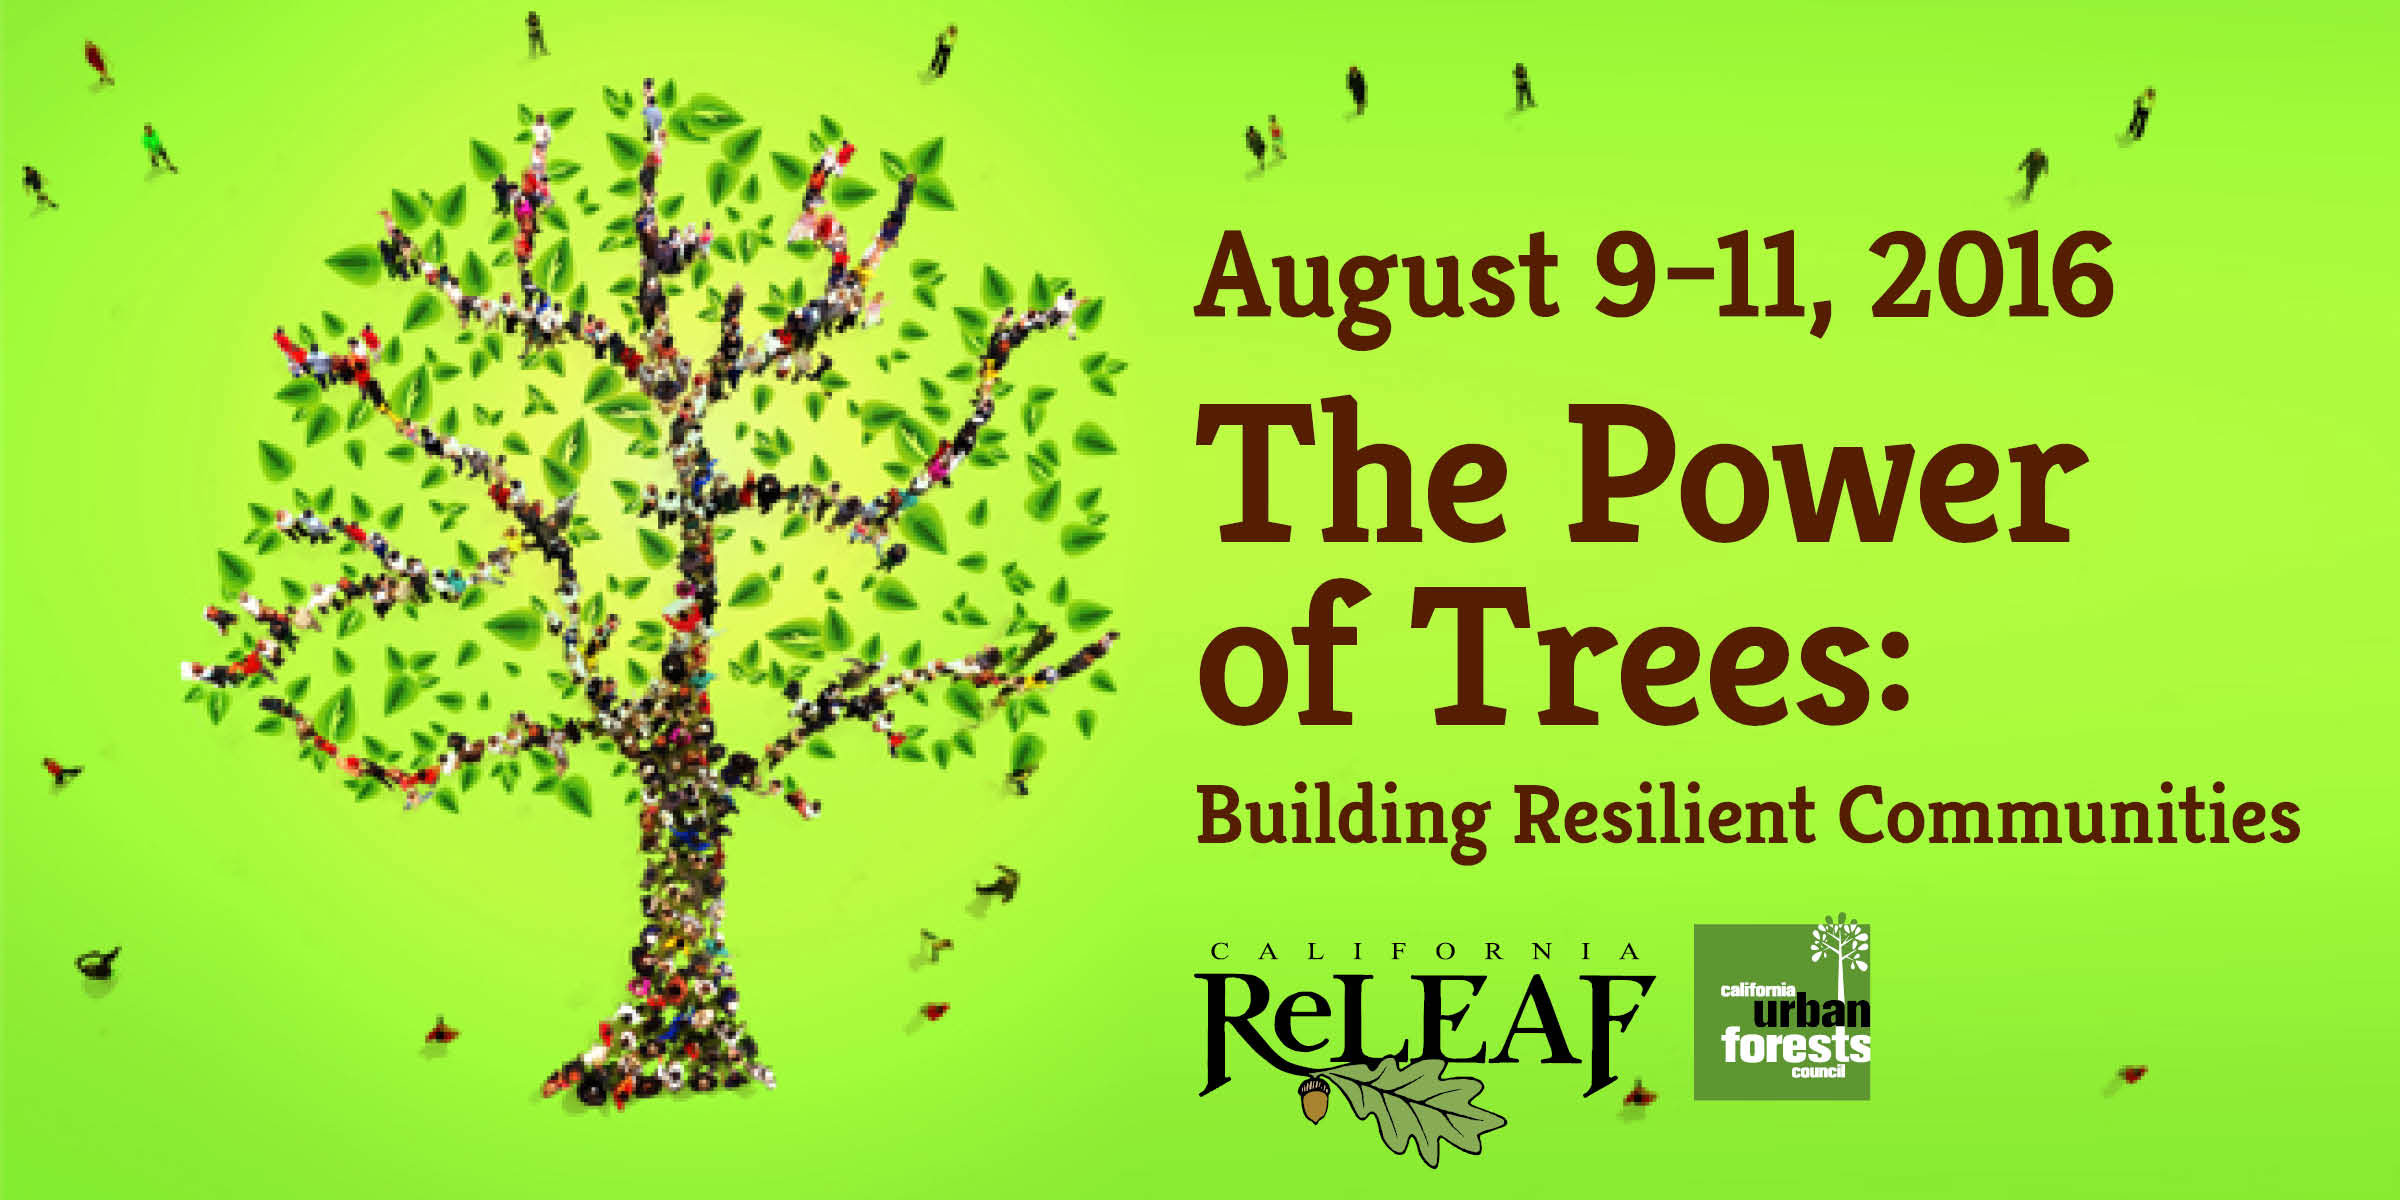 The Power of Trees: Building Resilient Communities